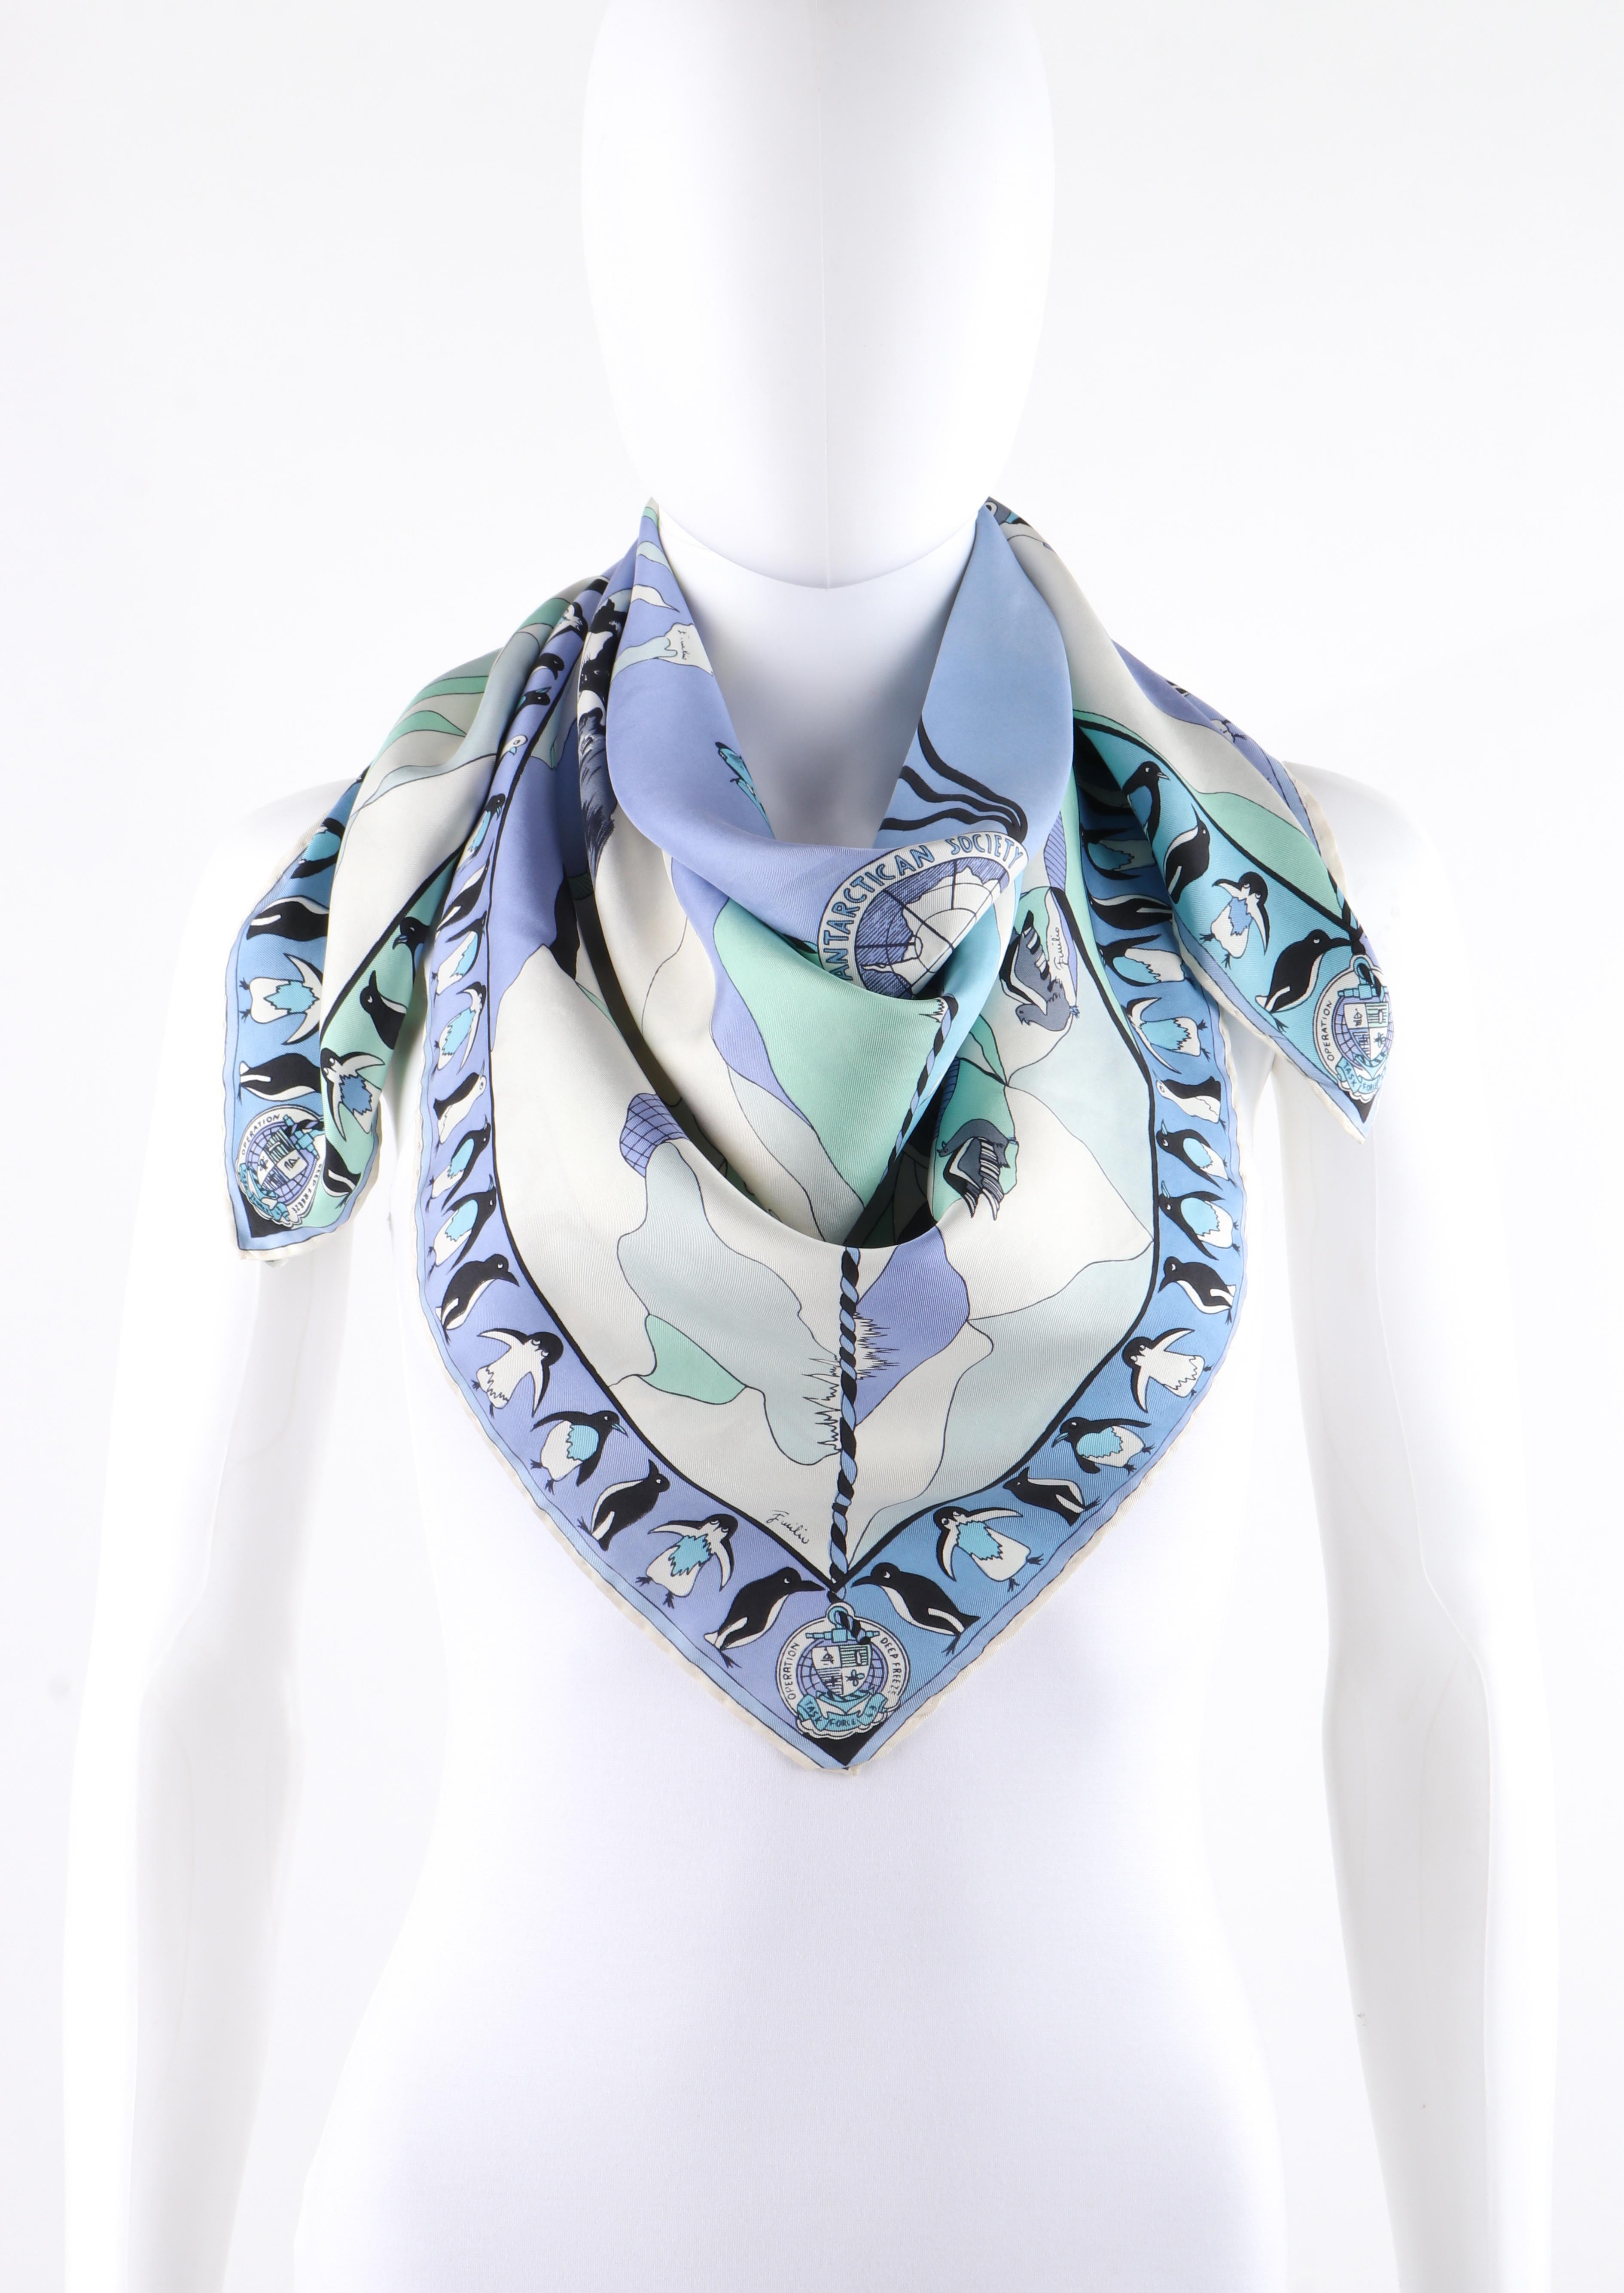 EMILIO PUCCI c.1960’s “The Antarctican Society” Antarctic Motif Print Silk Scarf
 
Brand/Manufacturer: Emilio Pucci
Circa: 1960’s 
Designer: Emilio Pucci
Style: Square silk scarf
Color(s): Shades of blue, green, gray, purple, black, and white
Lined: